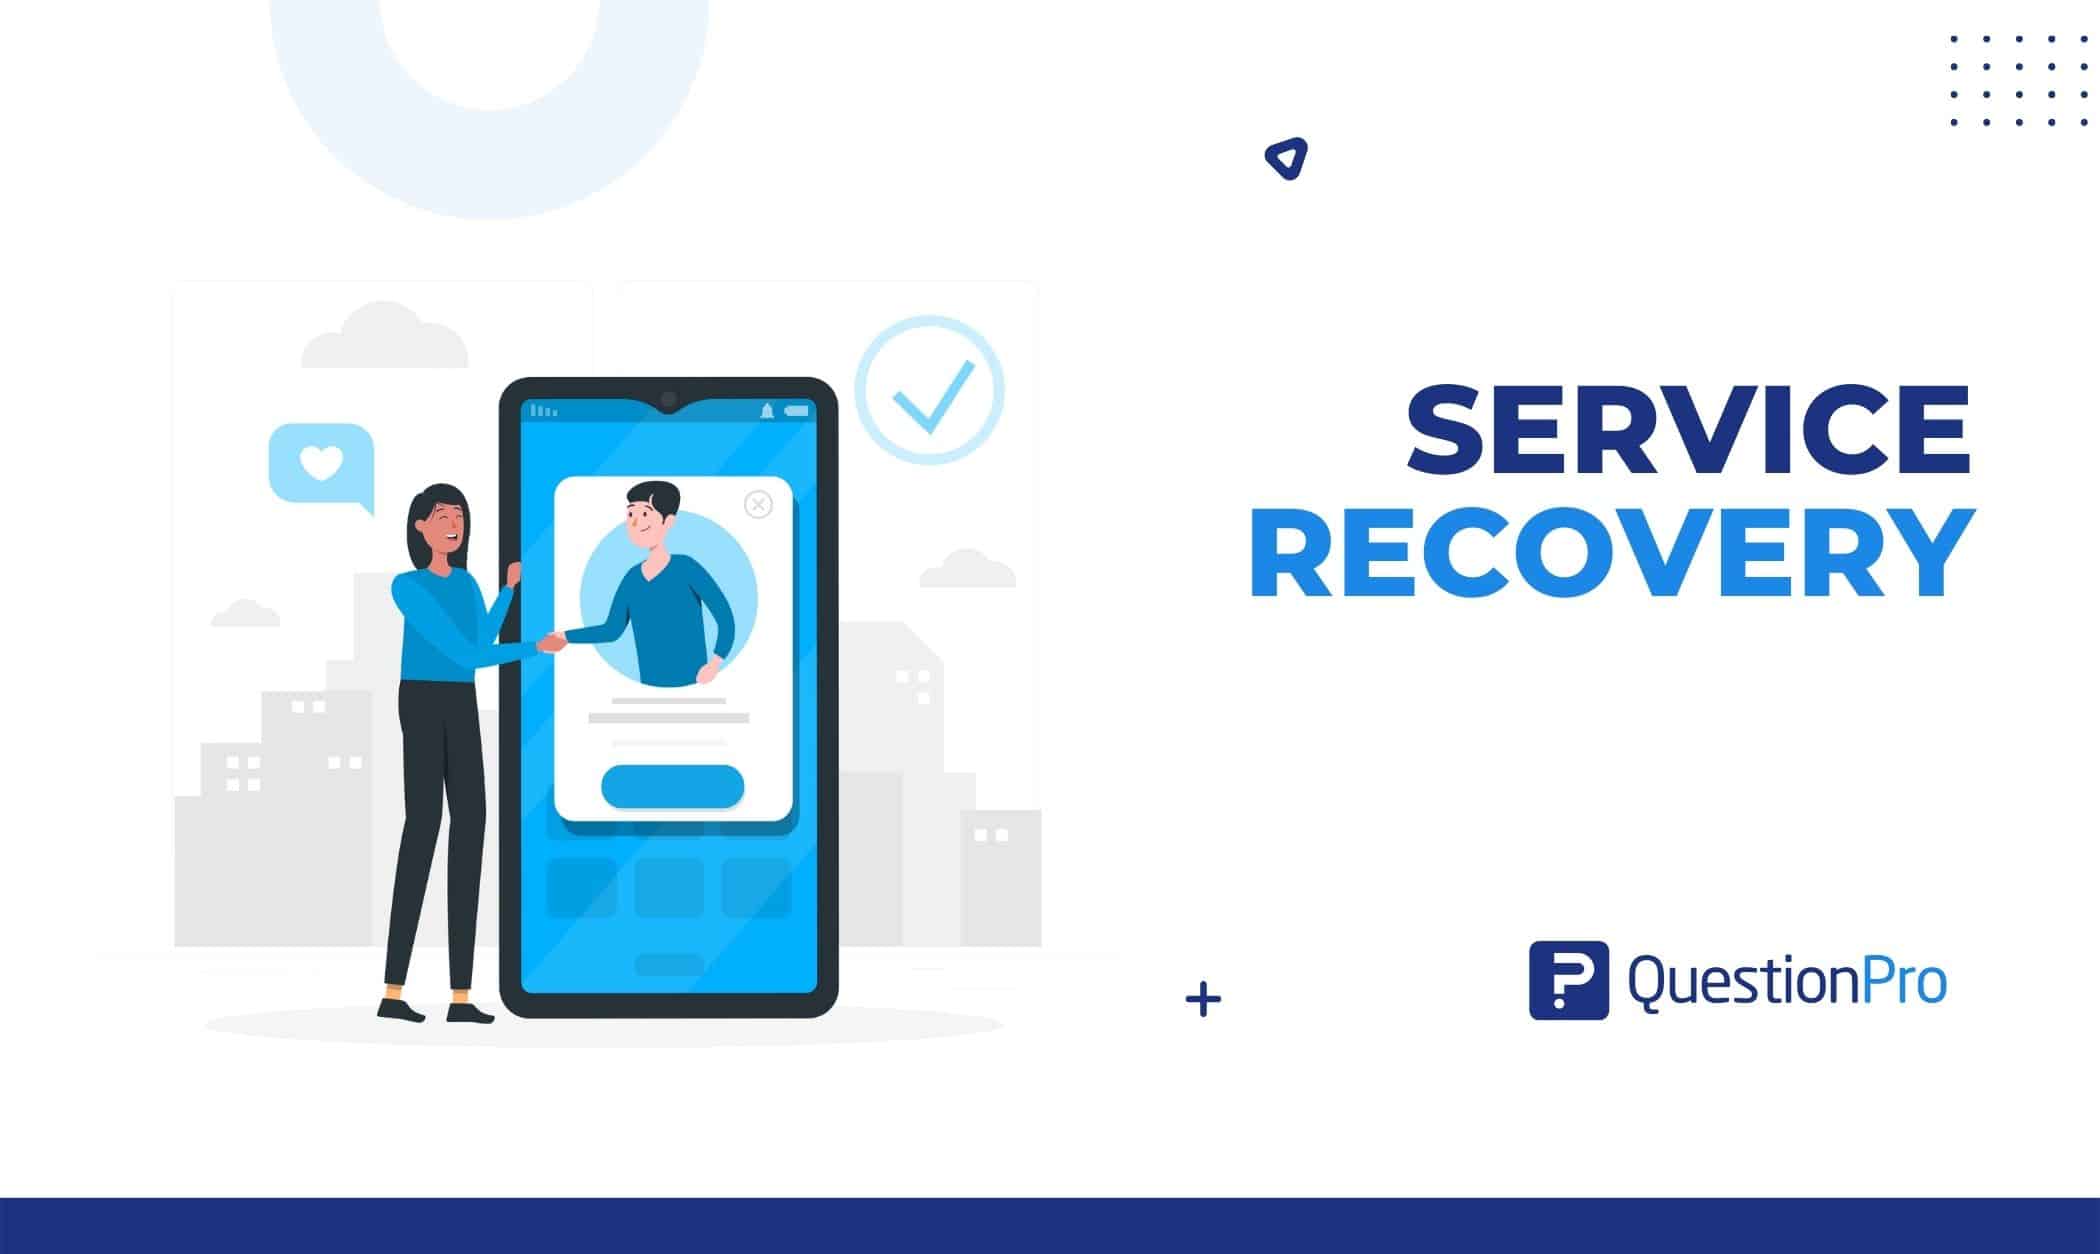 Service recovery is an organization's settlement of unhappy customers' concerns, resulting in loyal consumers. Learn everything about it.